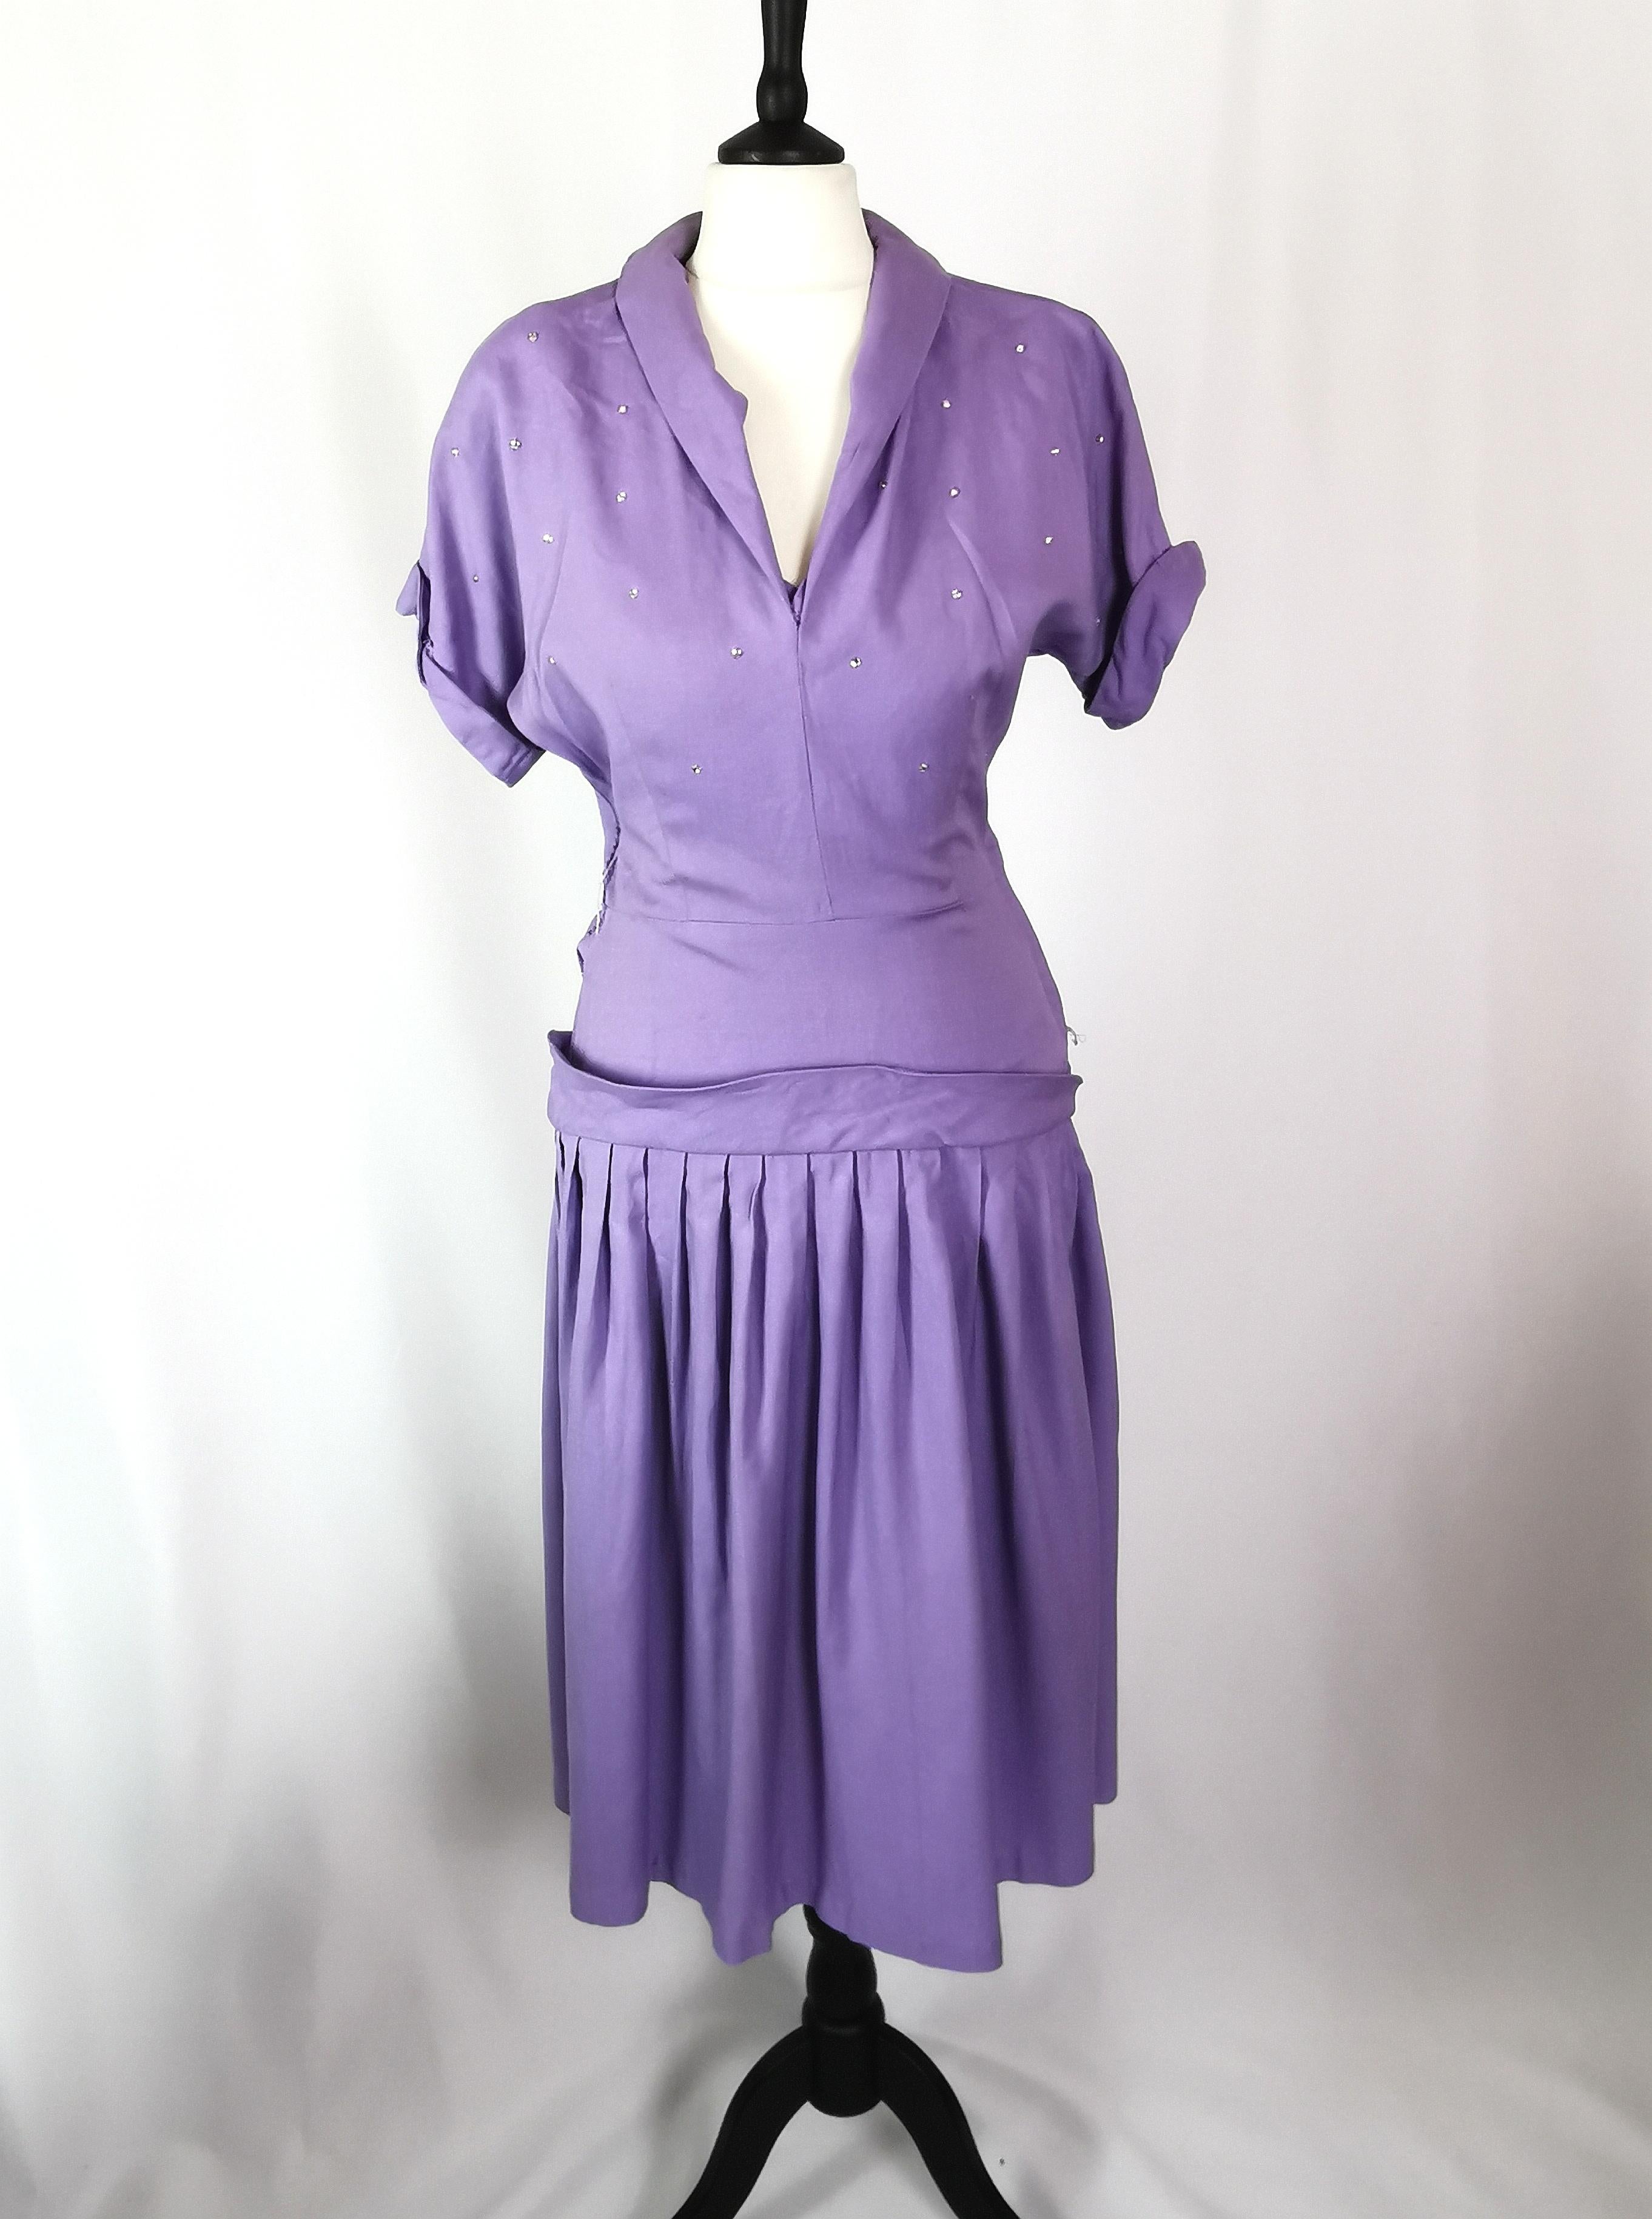 A simply stunning vintage 1940s lilac dress.

Made from a heavy cotton / wool knit blend in a vibrant lilac colour, it is a knee length with a full skirt.

The dress has short sleeves with a turn up and is almost a shirt waist style, it has a long v